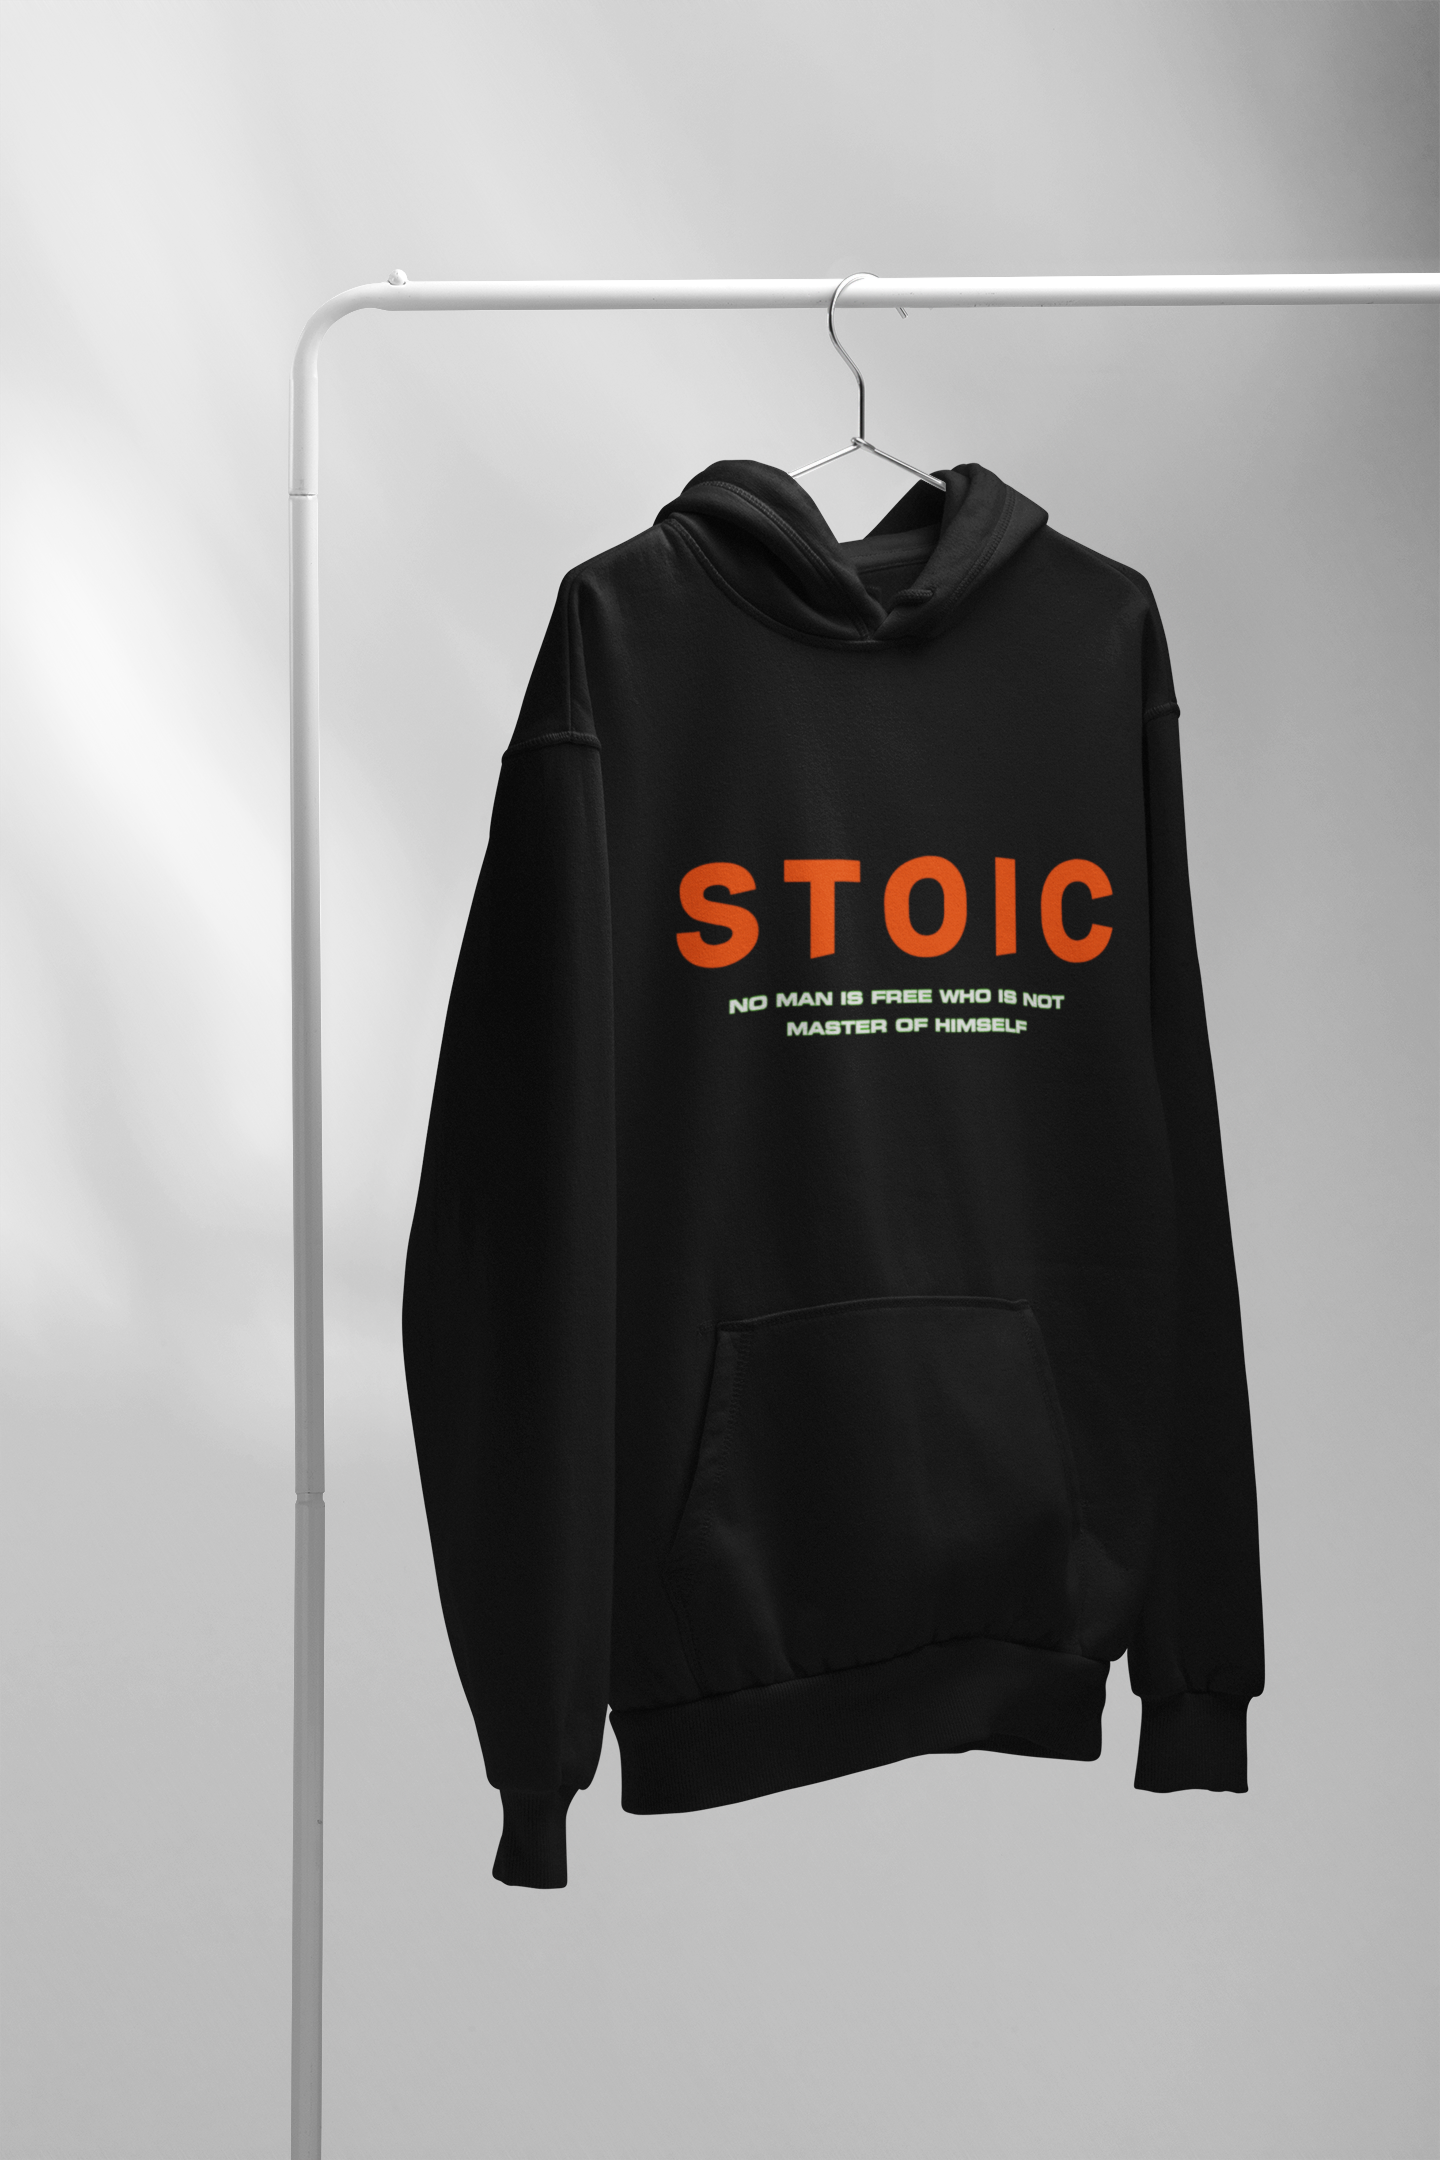 Stoic Oversized Fit Hoodie